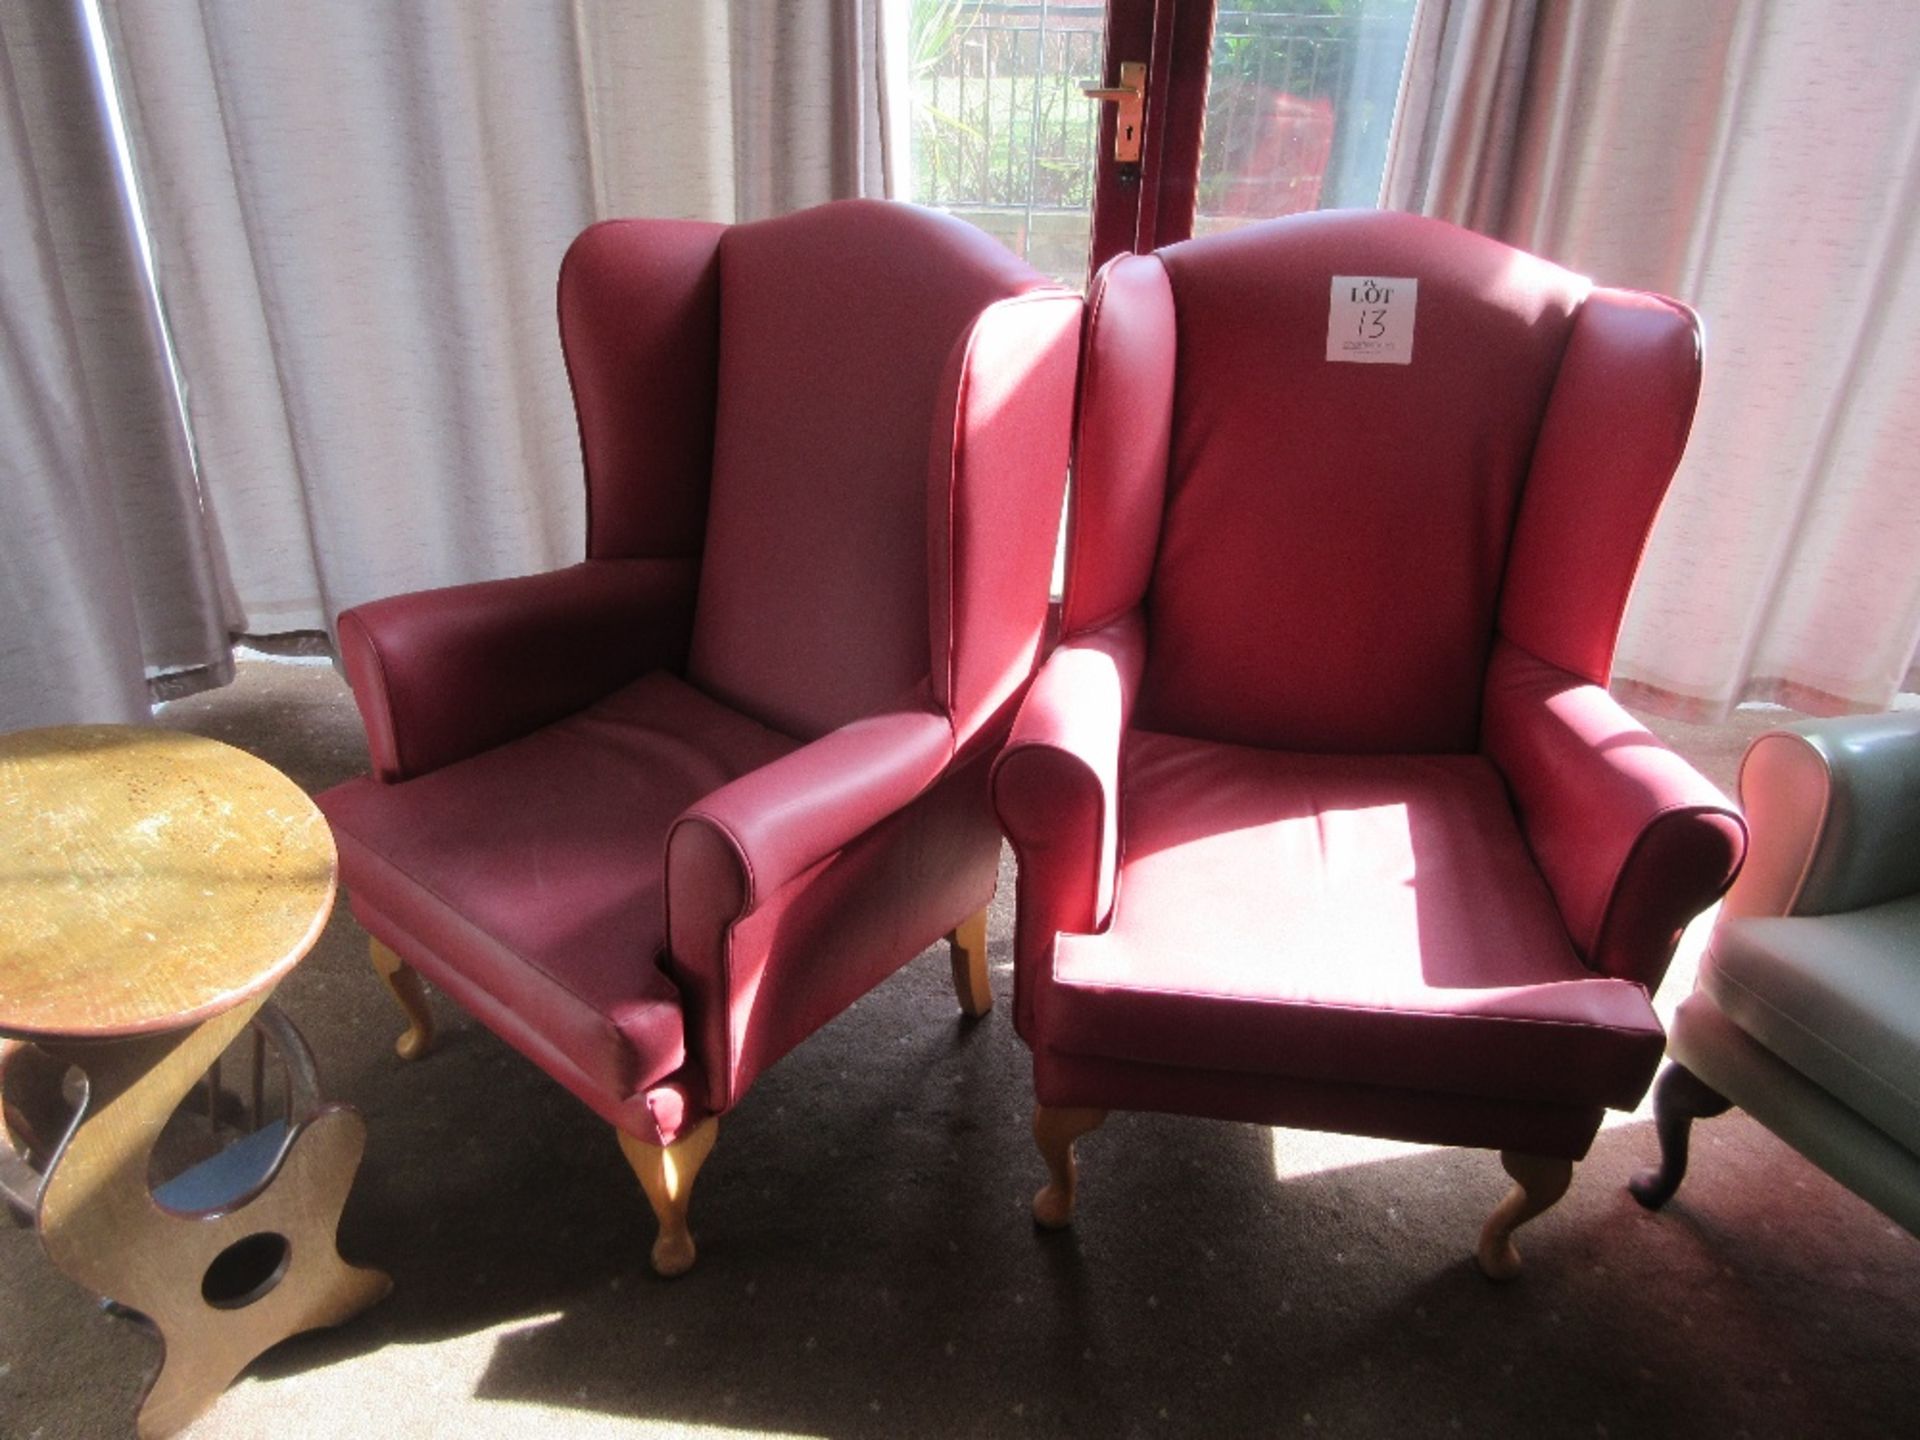 4 - Red vinyl based armchairs